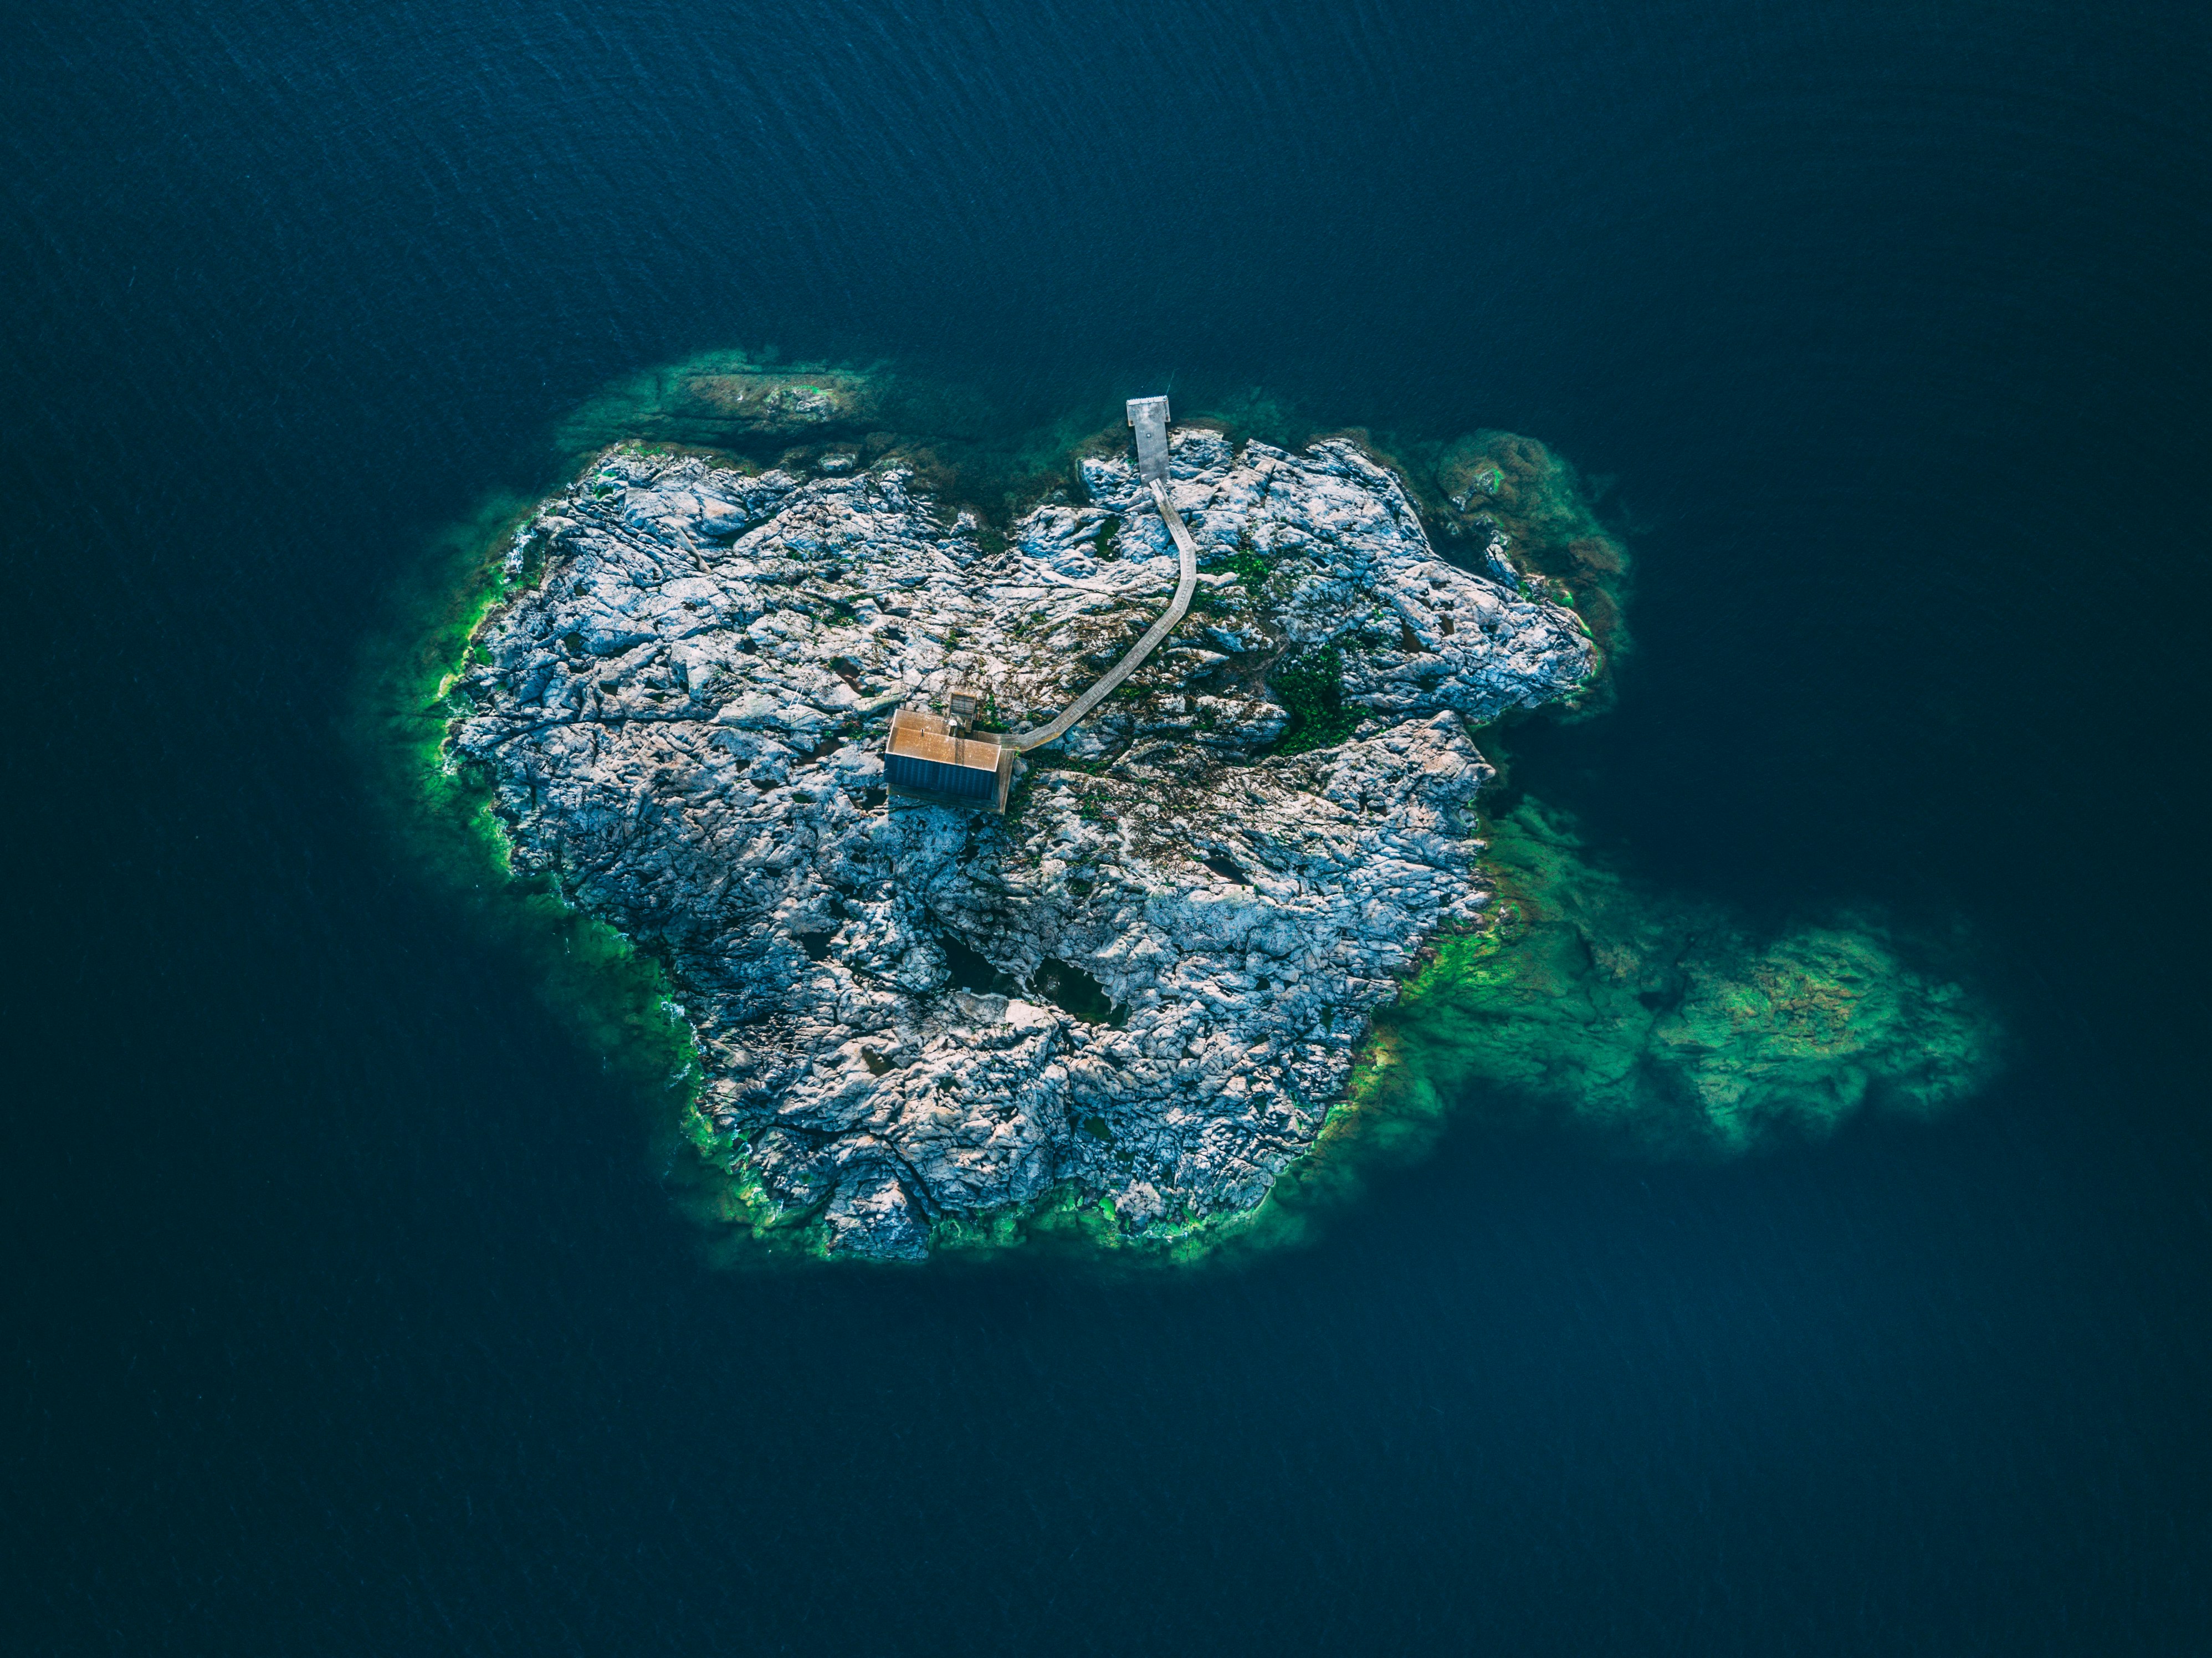 aerial view photography of island surrounded by ocean during daytime